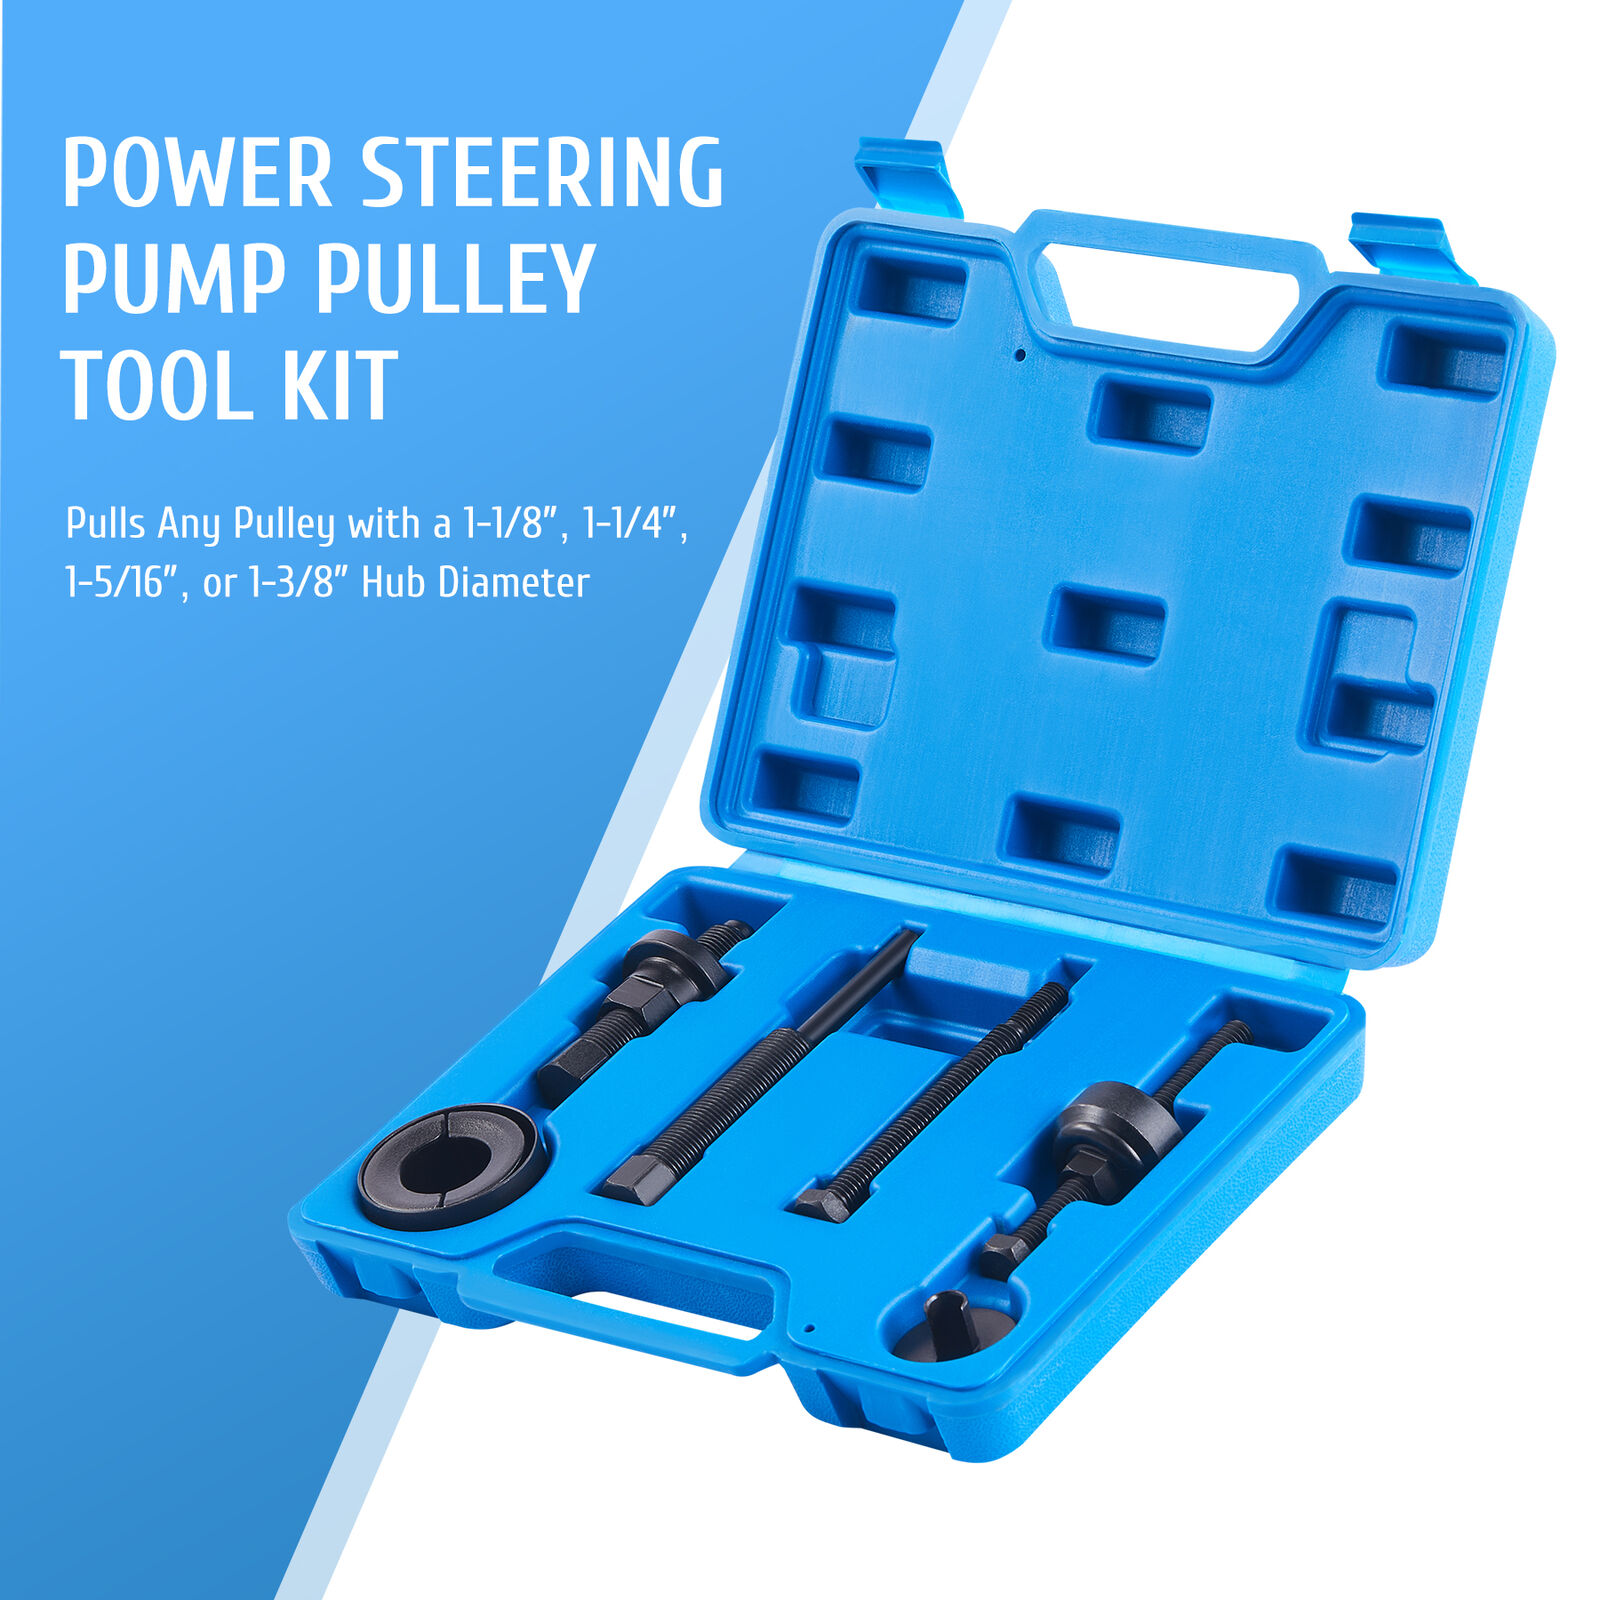 OMT 7pc Power Steering Pump Pulley Removal Tool Set for Jeep Ford Chevrolet More